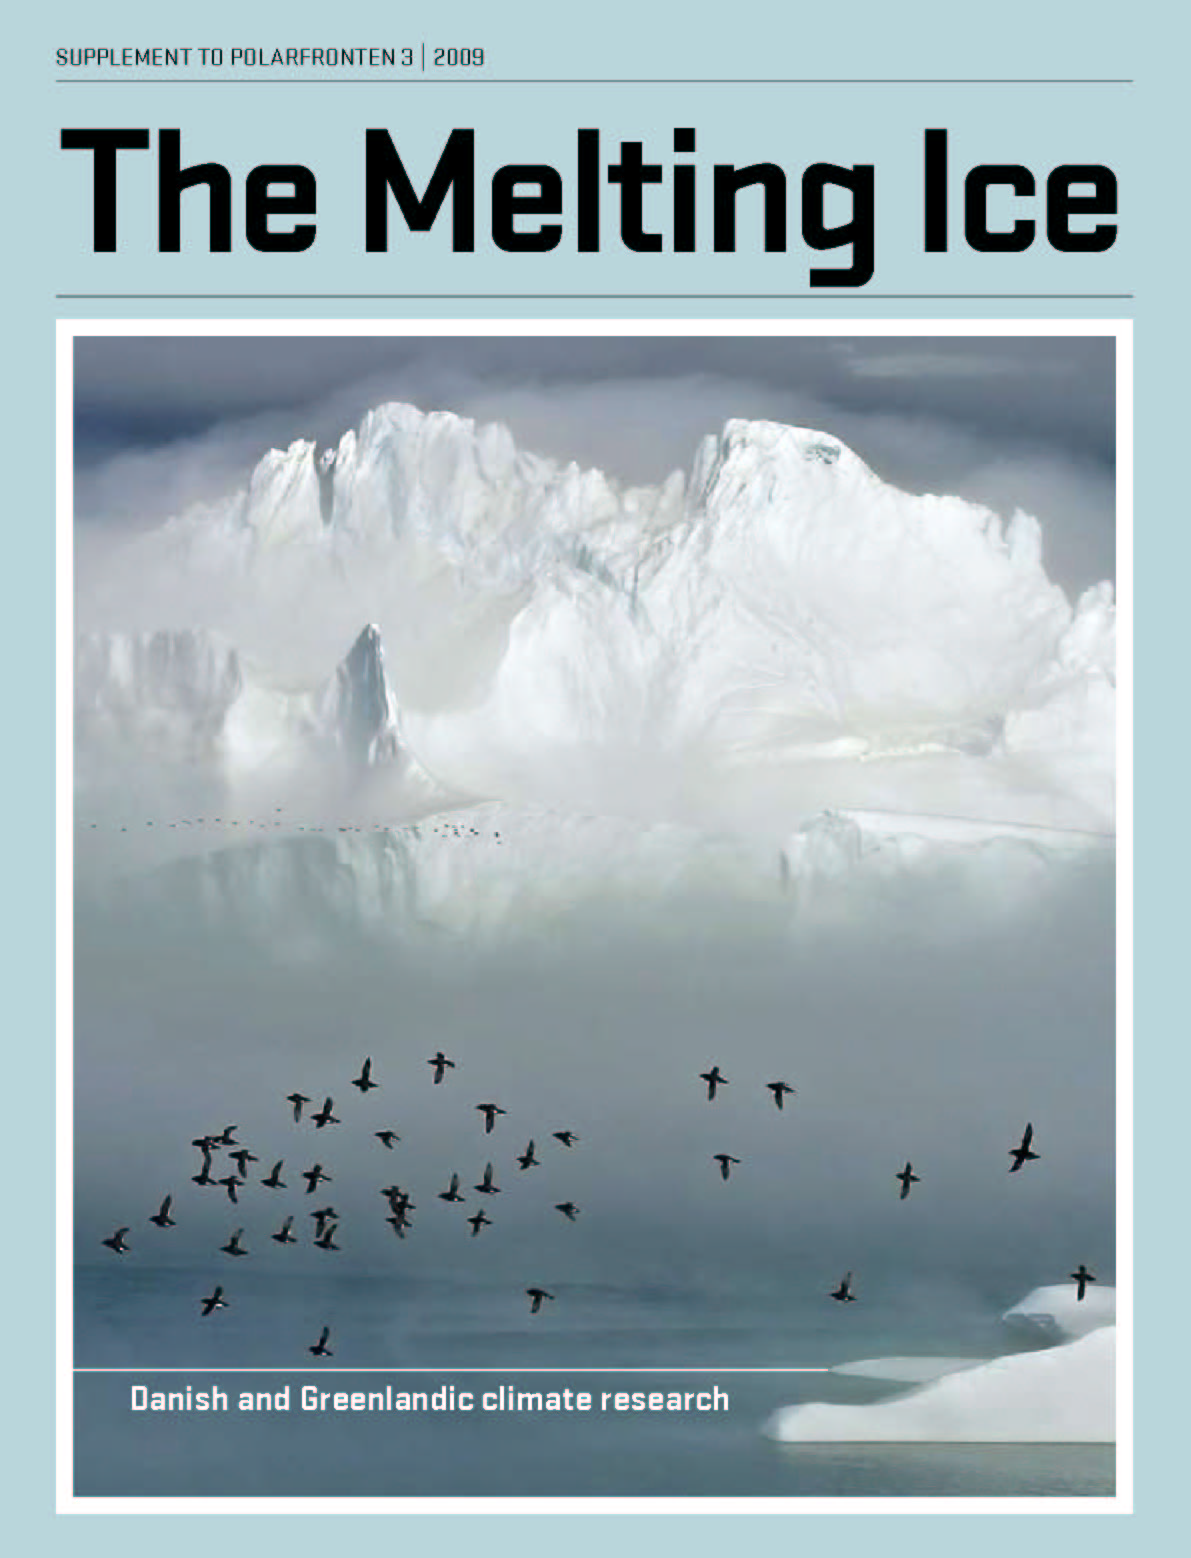 Book frontpage: The Melting Ice